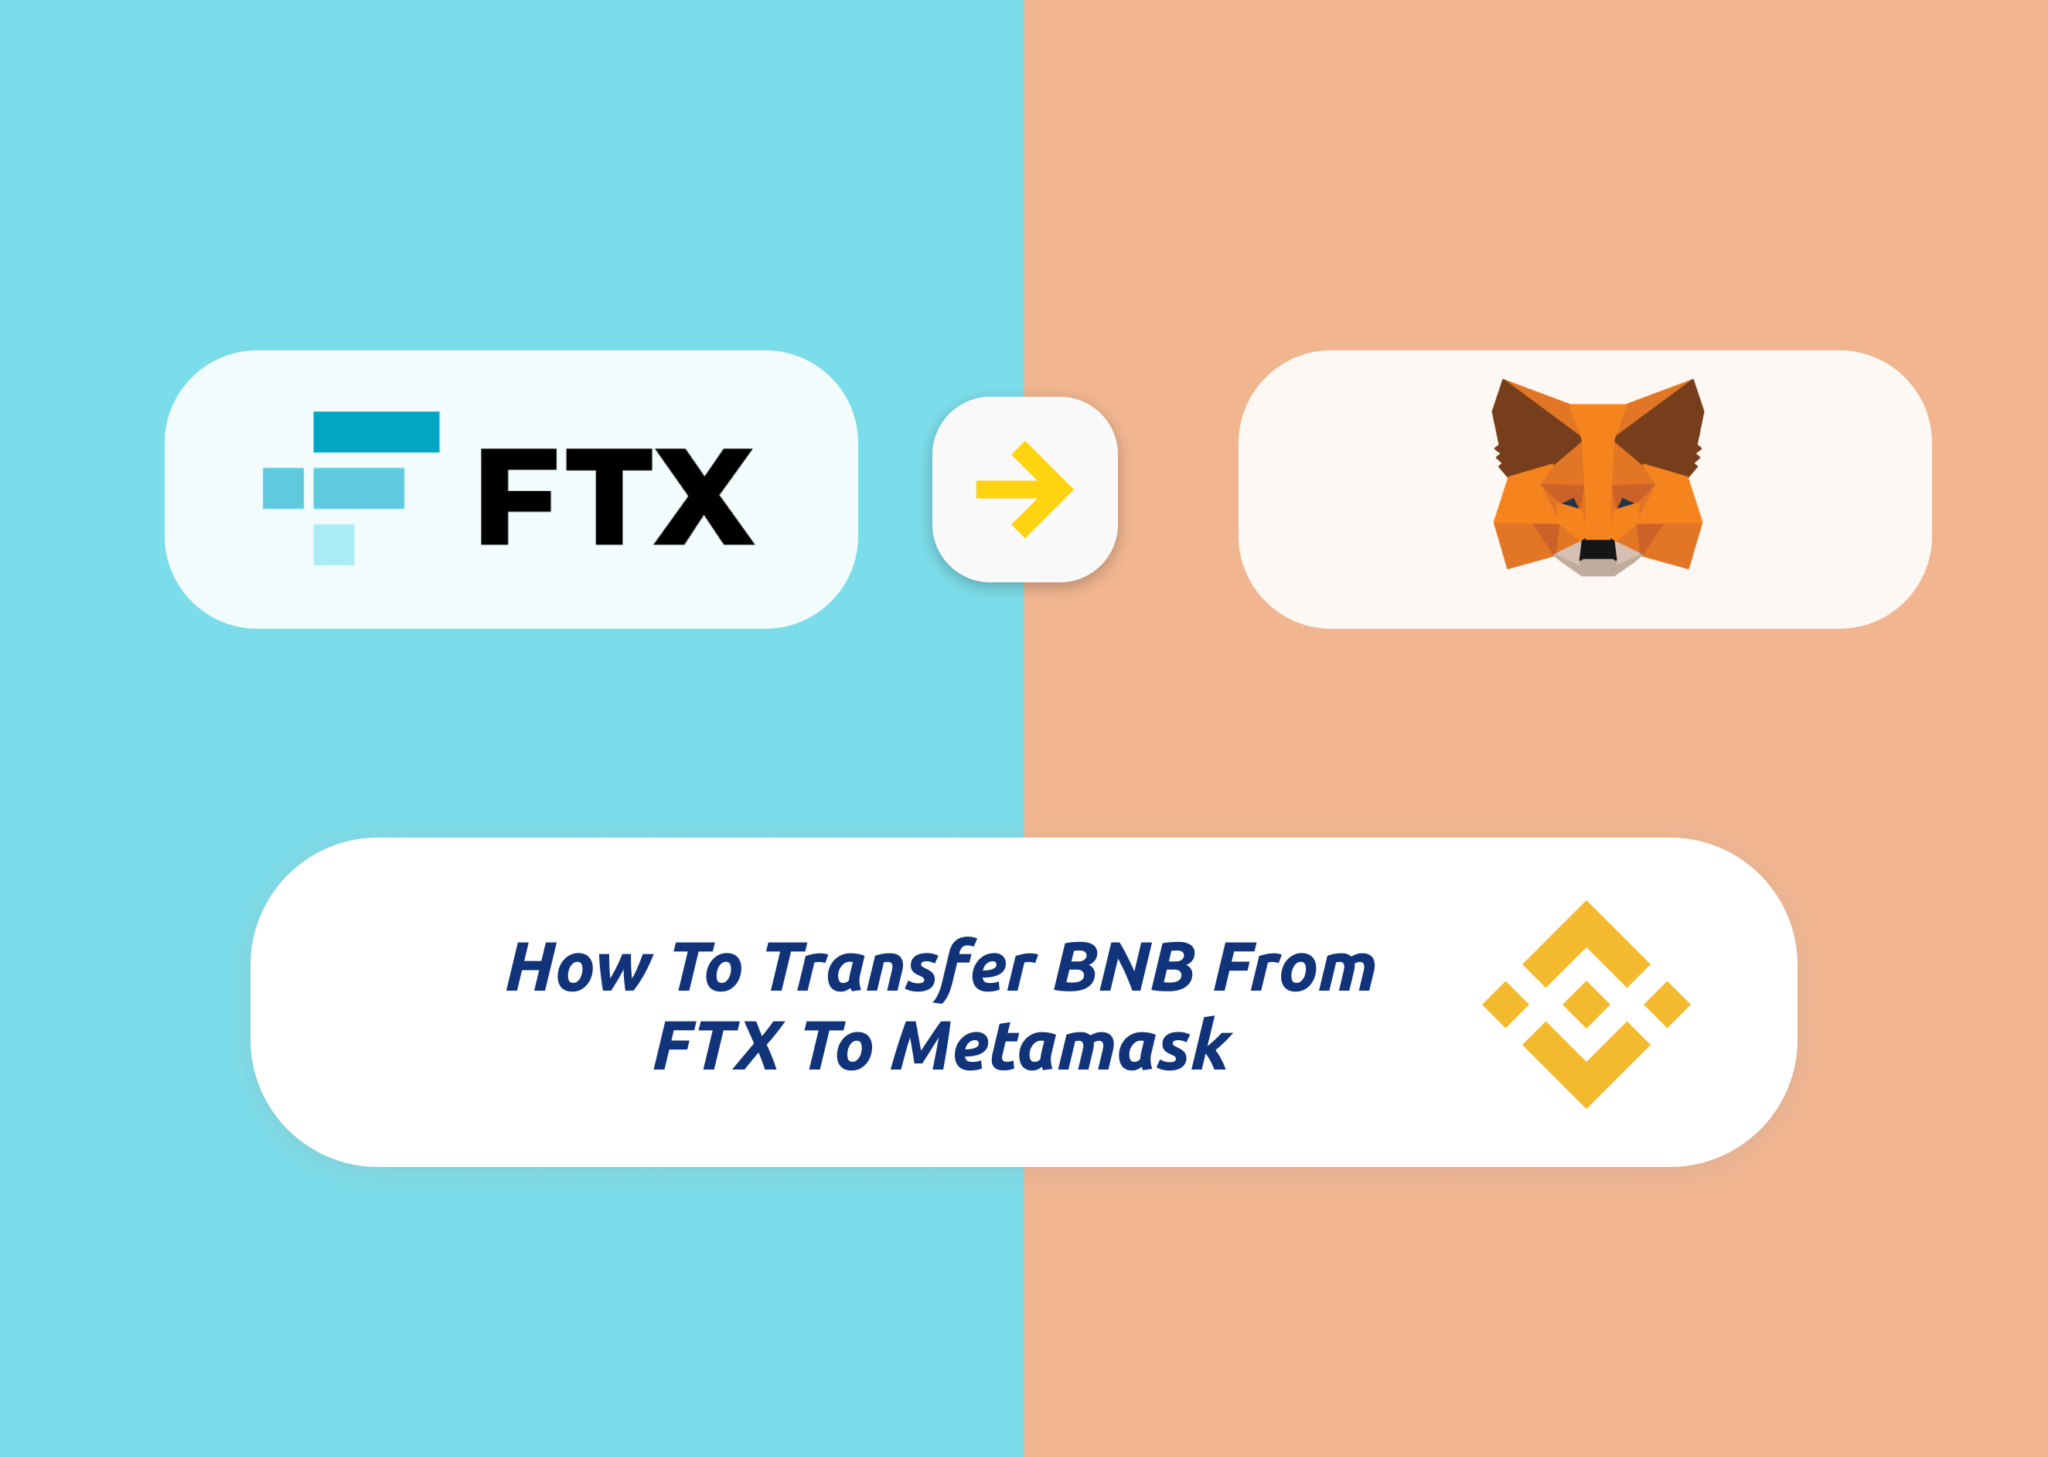 5 Steps To Transfer BNB From FTX To Metamask | Financially ...